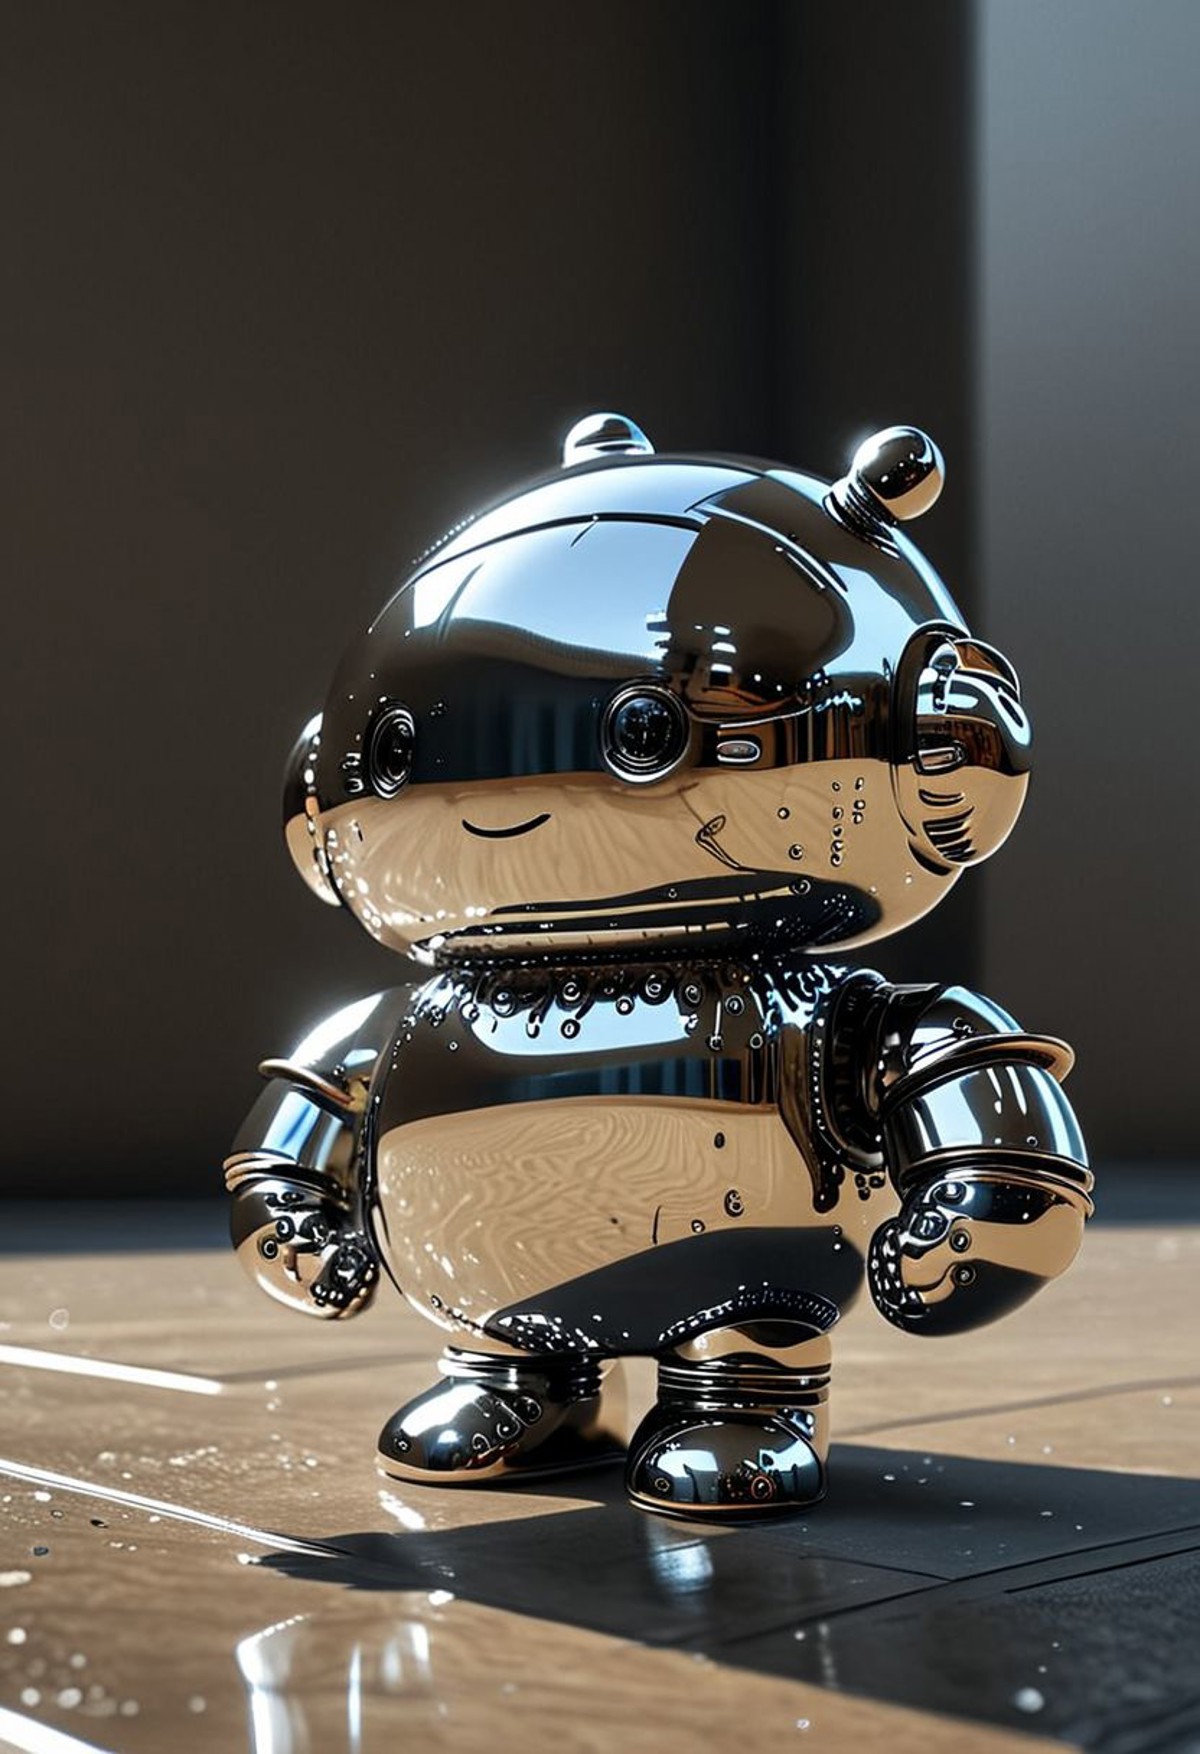 A small, glossy, metallic robot with beads of moisture on its body standing on a tile floor. The robot is standing with its hands by the sides of its rounded body, with large eyes on its head. 